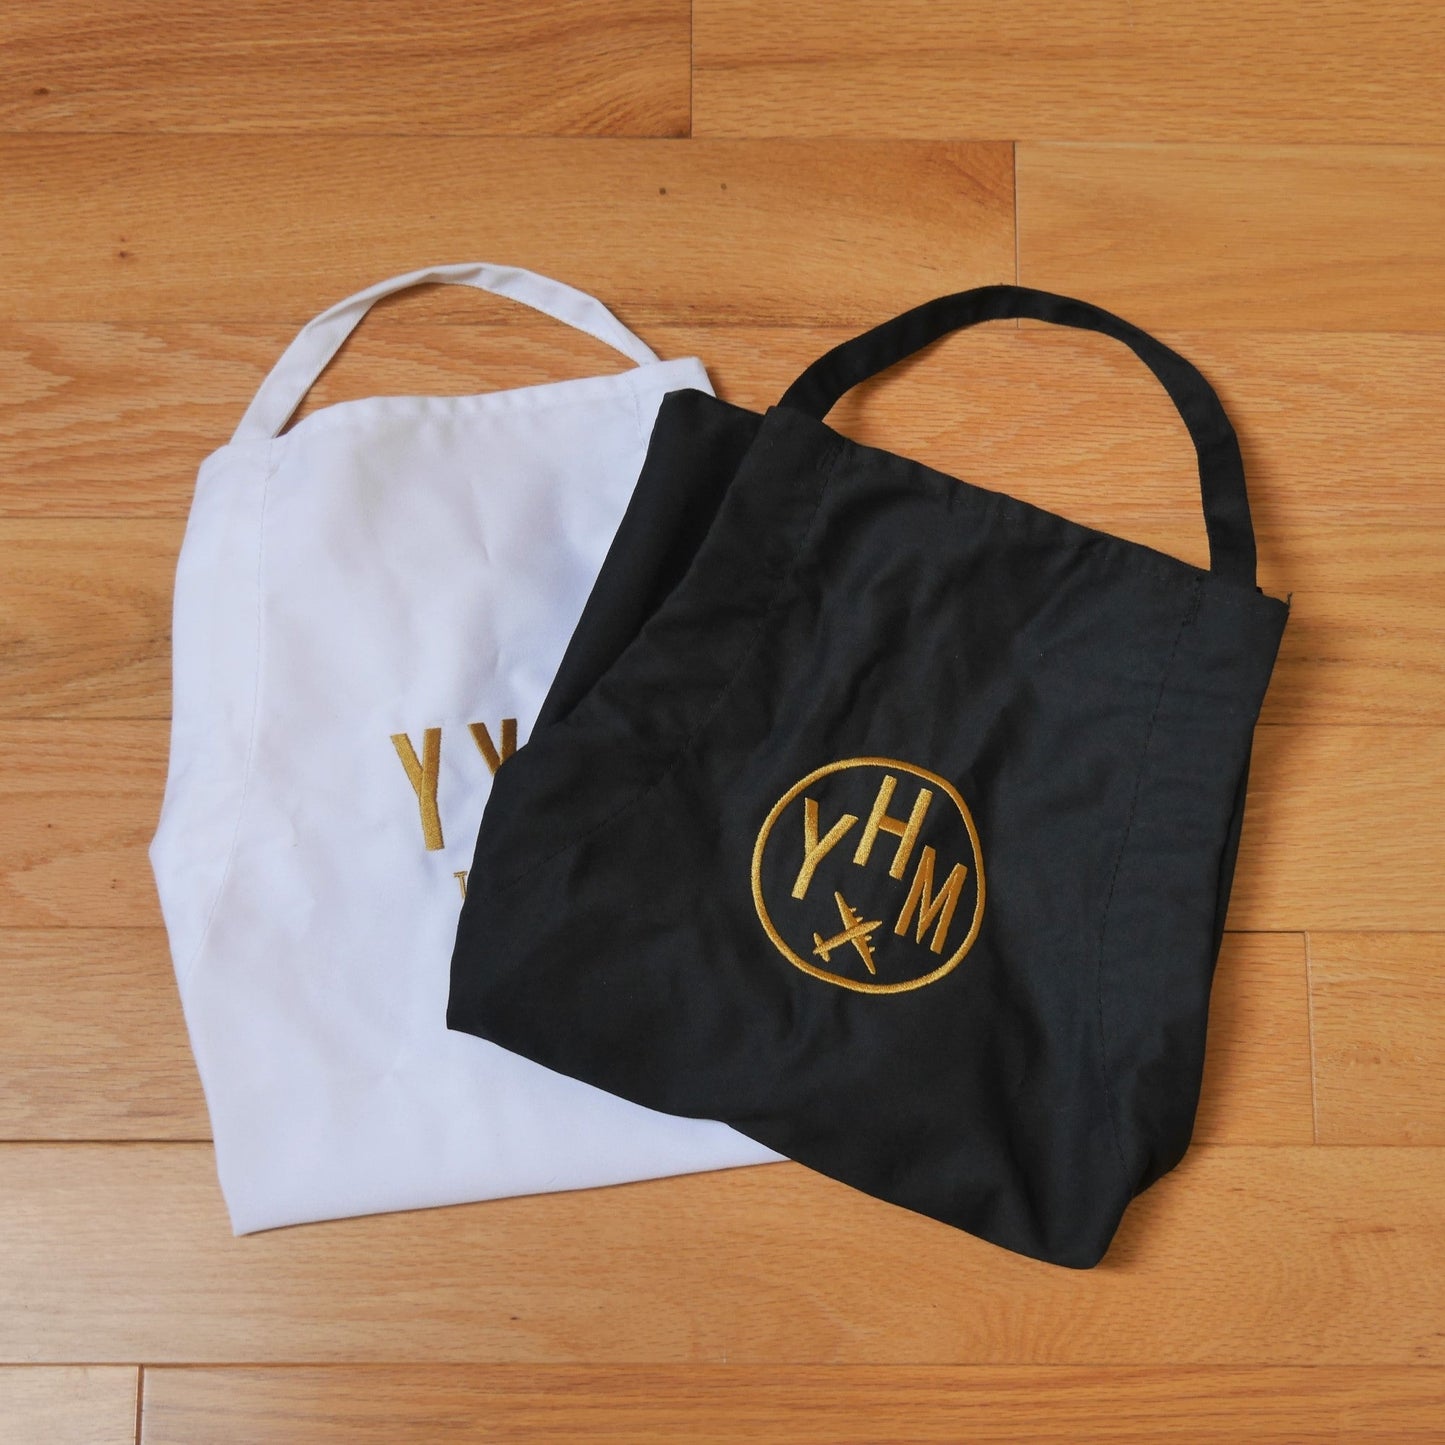 City Embroidered Apron - Old Gold • CDG Paris • YHM Designs - Image 14